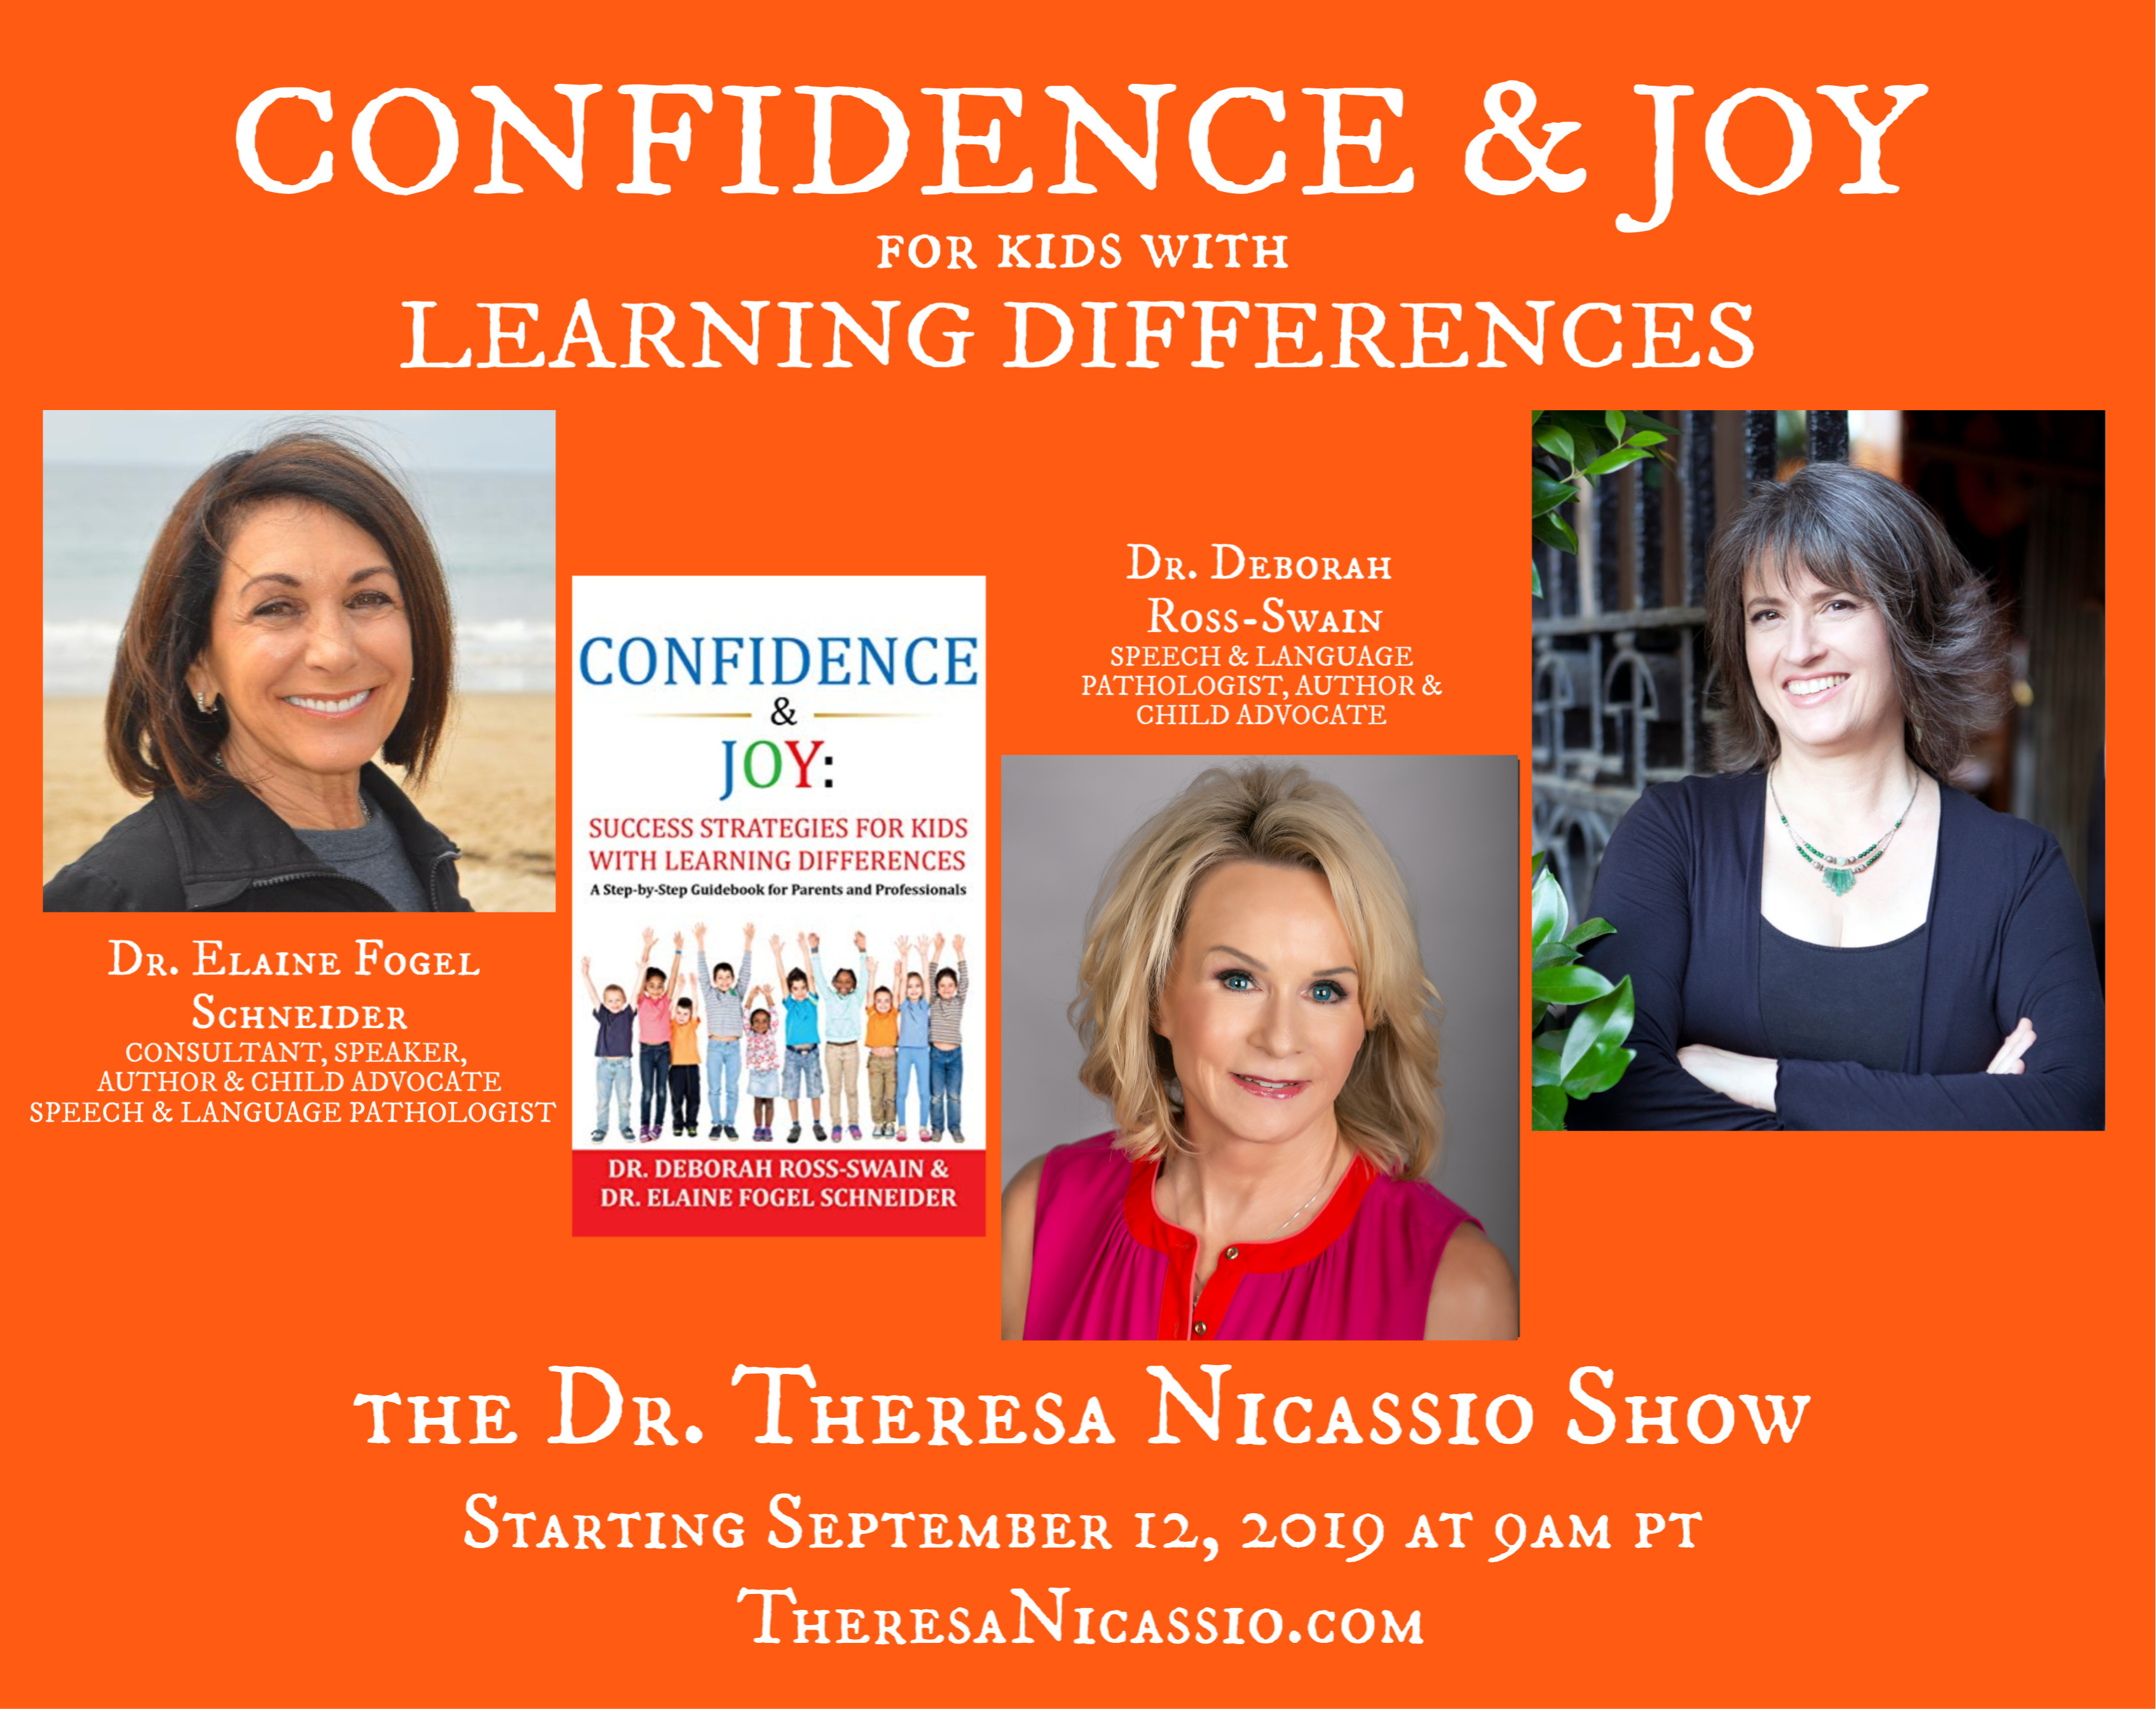 Hear child advocates Dr. Deborah Ross-Swain &amp; Dr. Elaine Fogel Schneider share strategies to help kids with learning differences discover SUCCESS, CONFIDENCE & JOY. Interview on The Dr. Theresa Nicassio Show on HealthyLife.net Radio